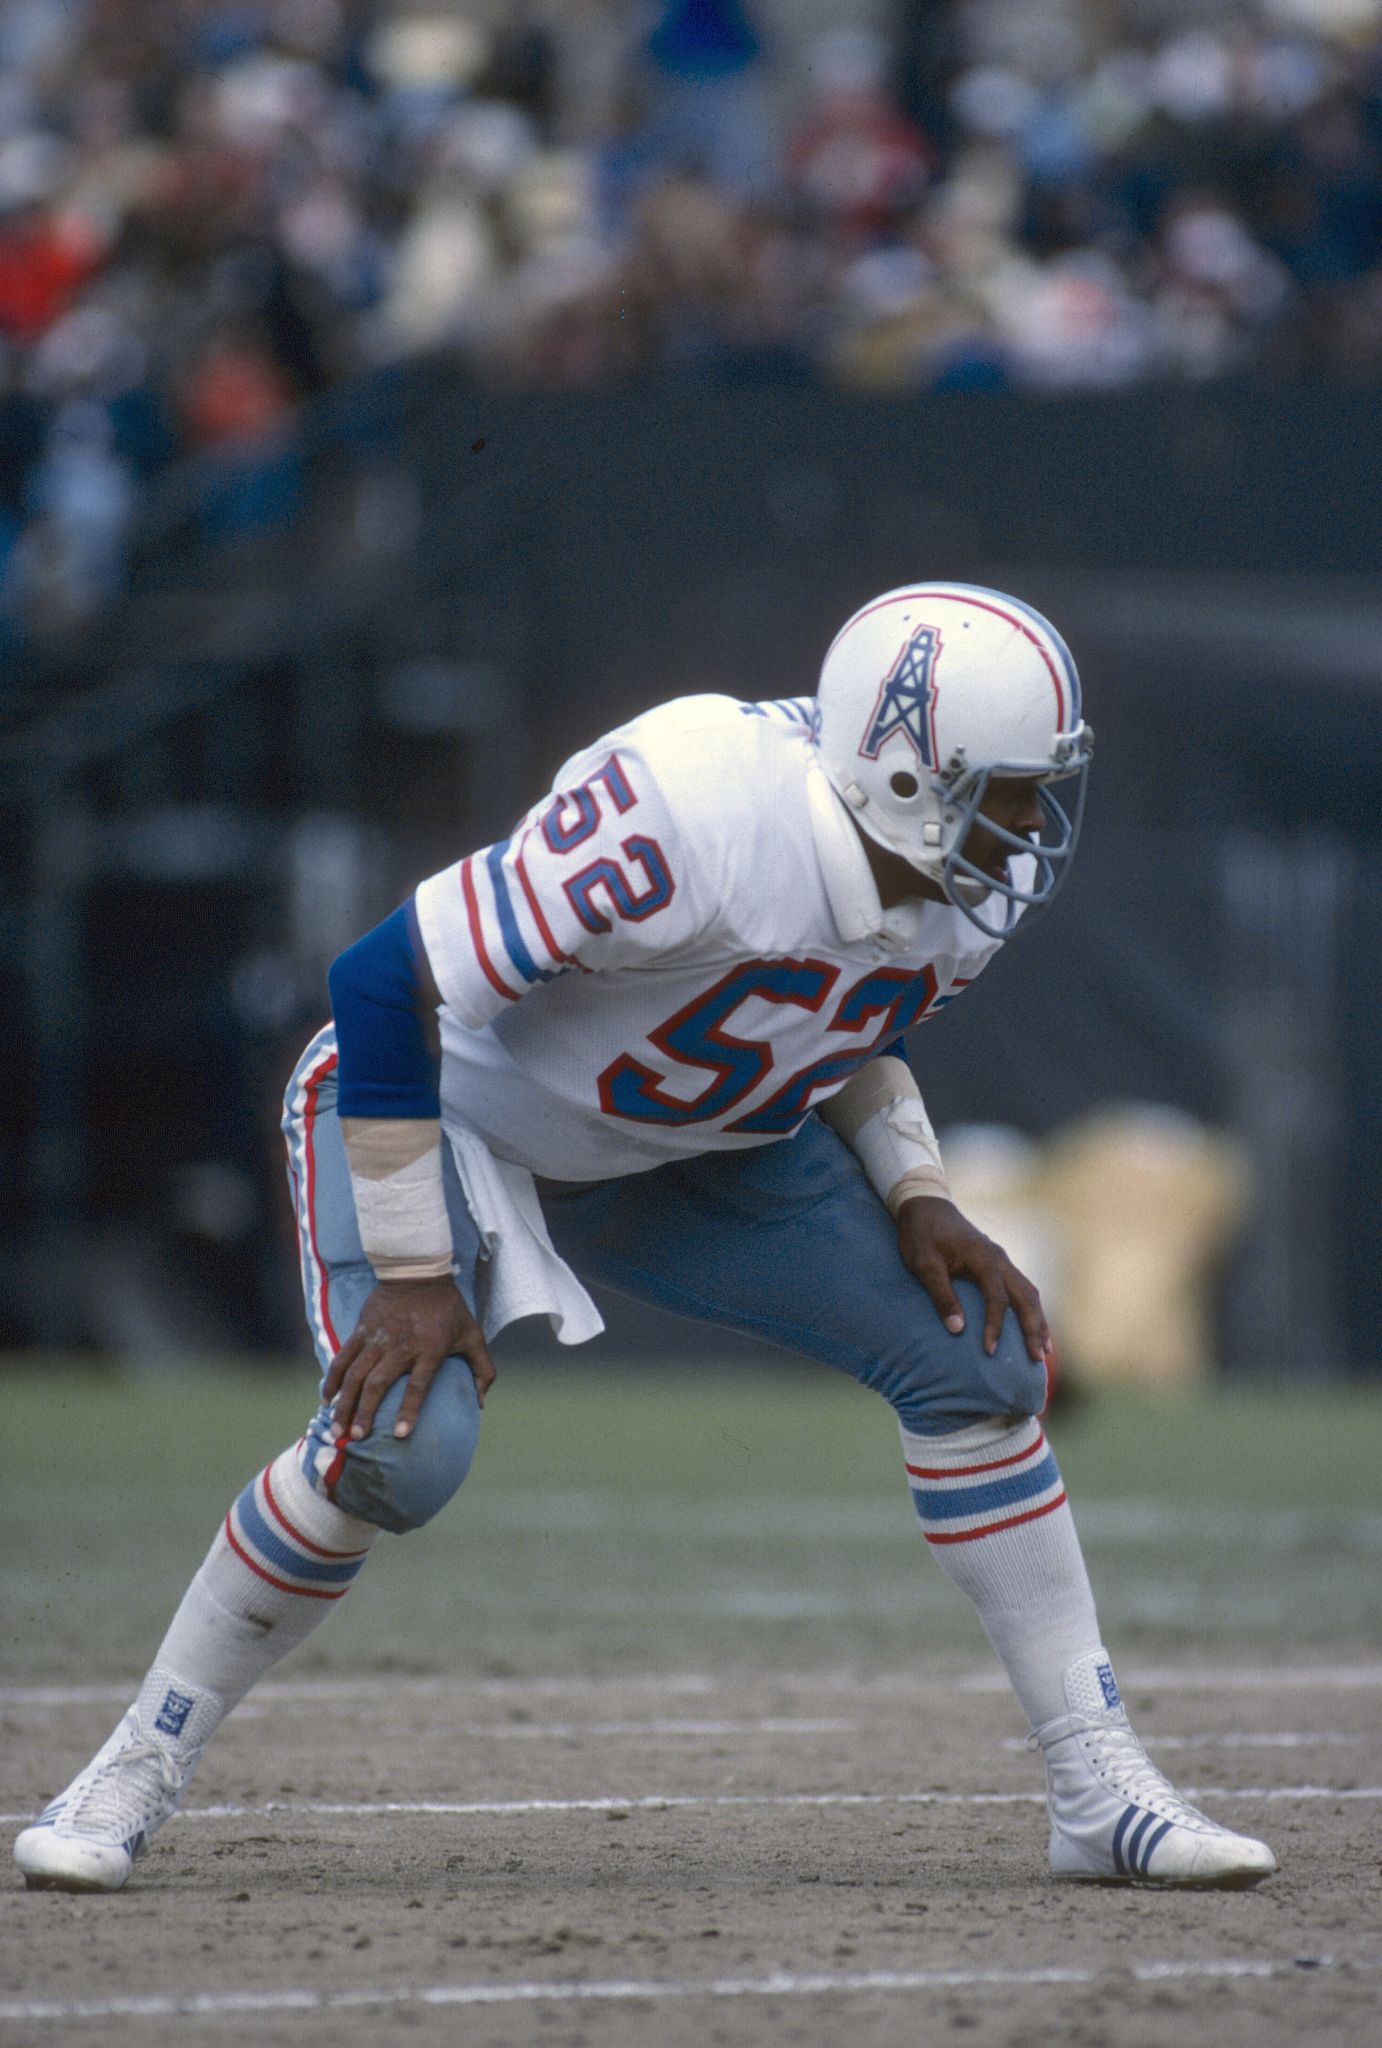 John McClain on X: Robert Brazile arrives at his hotel in Canton